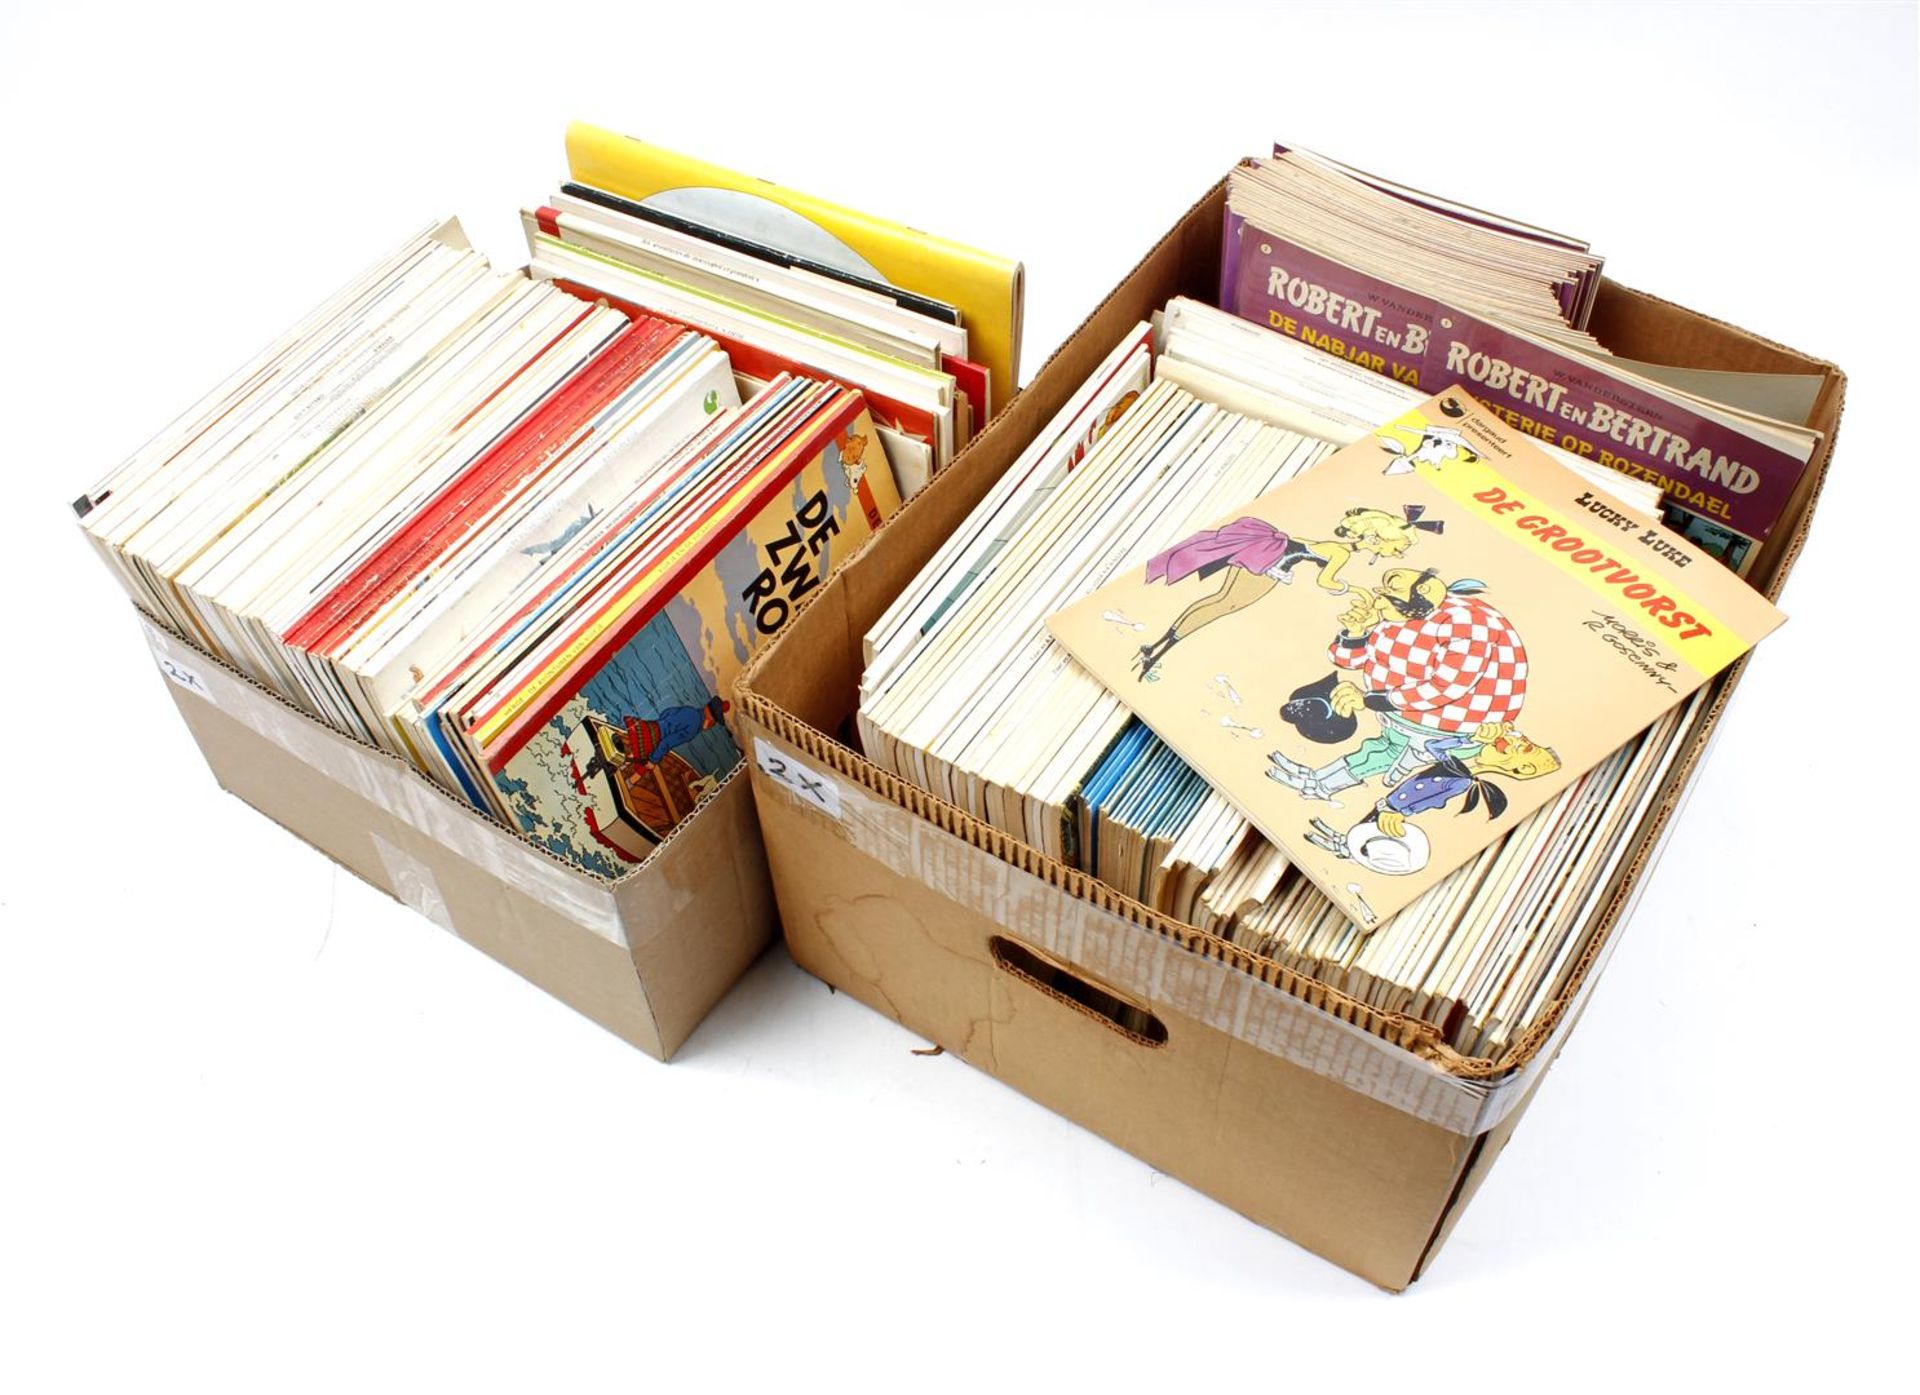 Box with various comic books